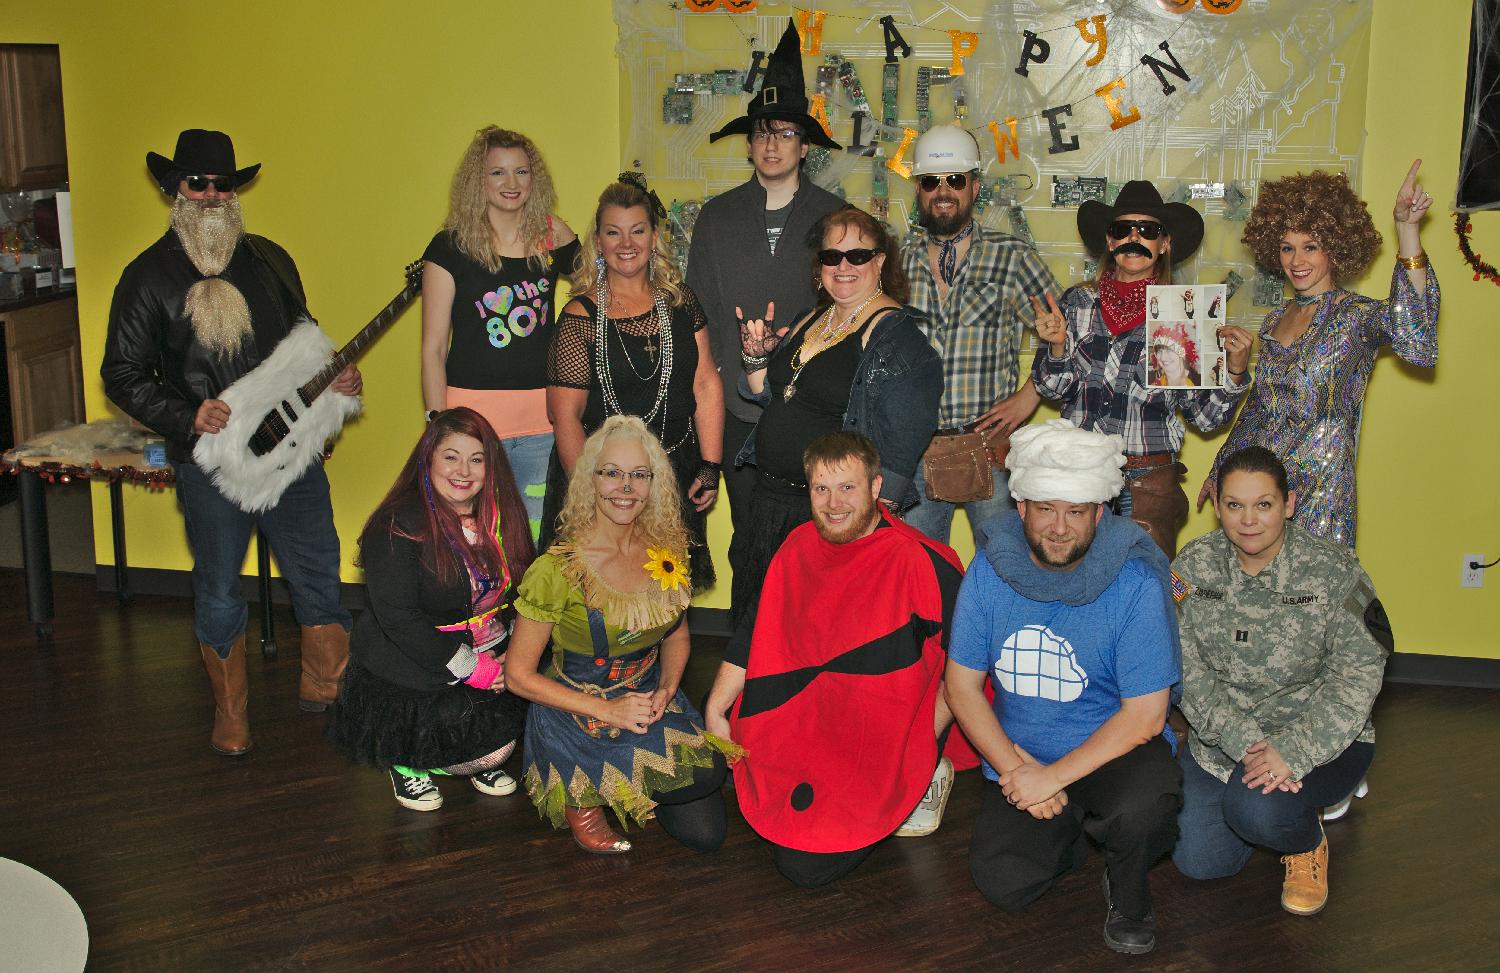 Halloween group picture in our Spokane, WA office